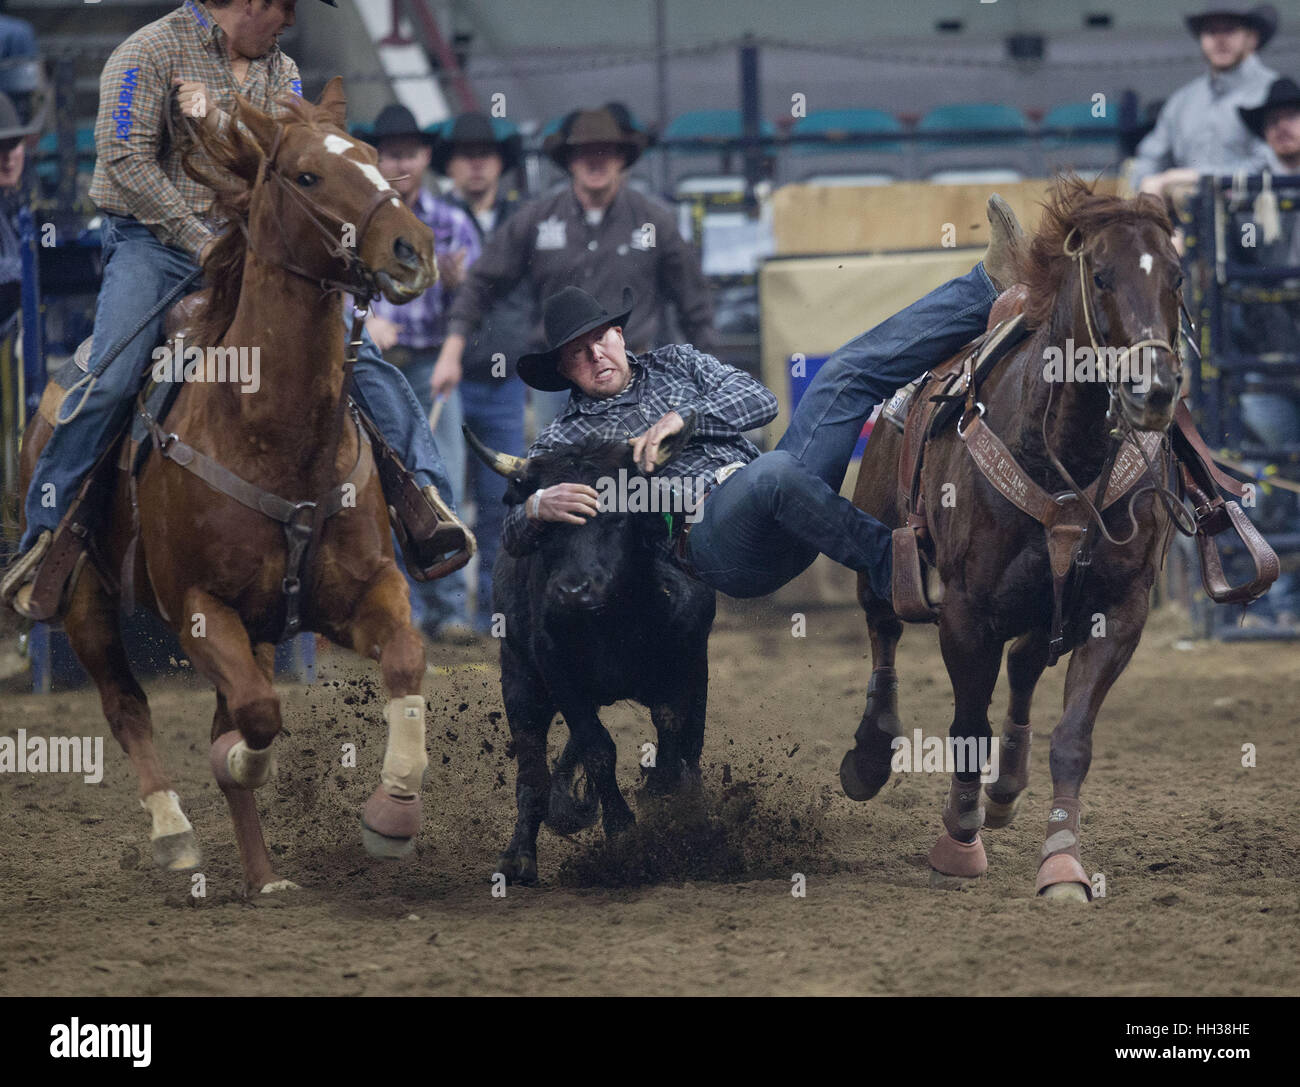 Denver, USA. 16th Jan, 2017. Steer Wrestler Cody Pratt of CO jumps on his steer during the PRCA Performance #9 at the National Western Stock Show Monday afternoon. Credit: Hector Acevedo/ZUMA Wire/Alamy Live News Stock Photo